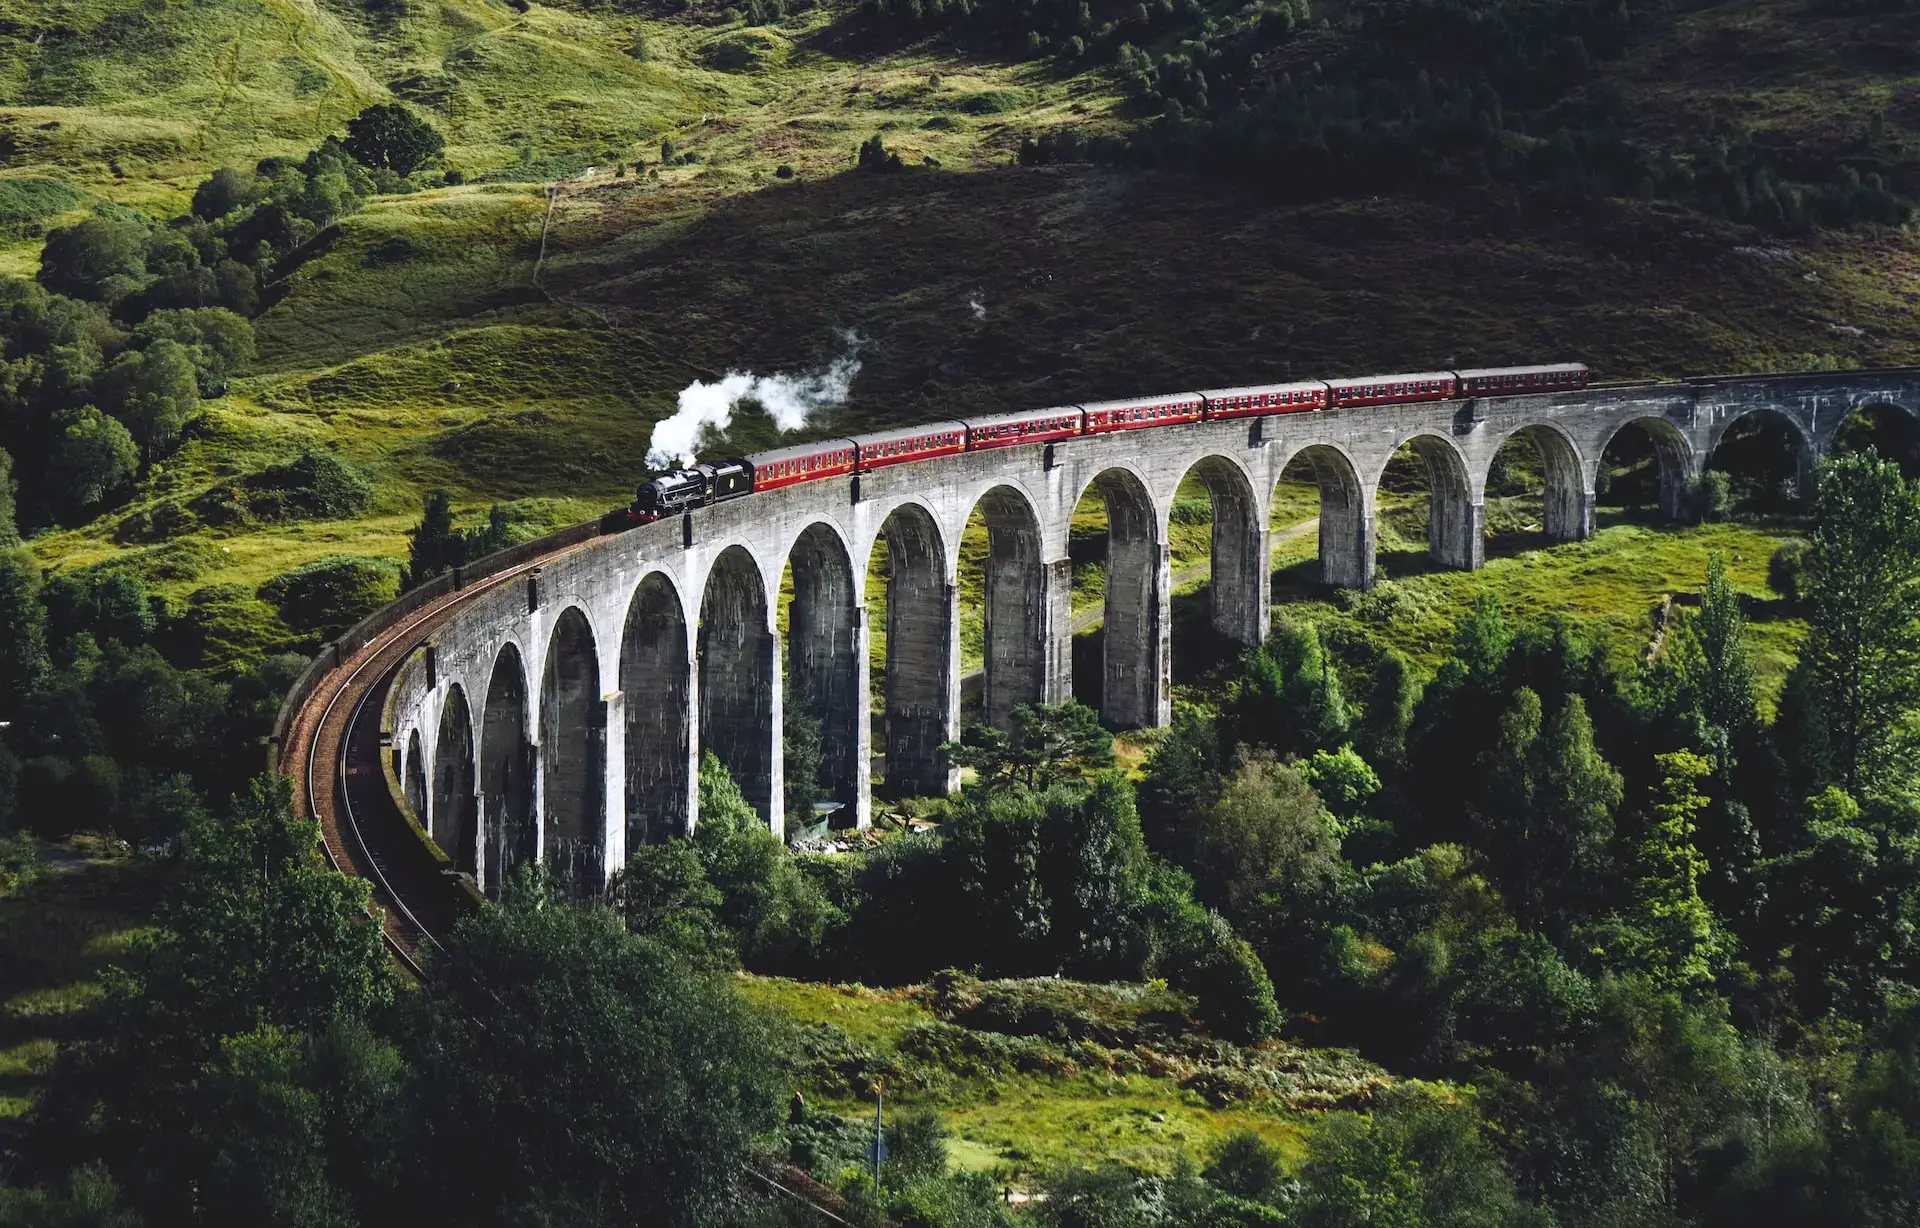 A picture of a train going across a bridge